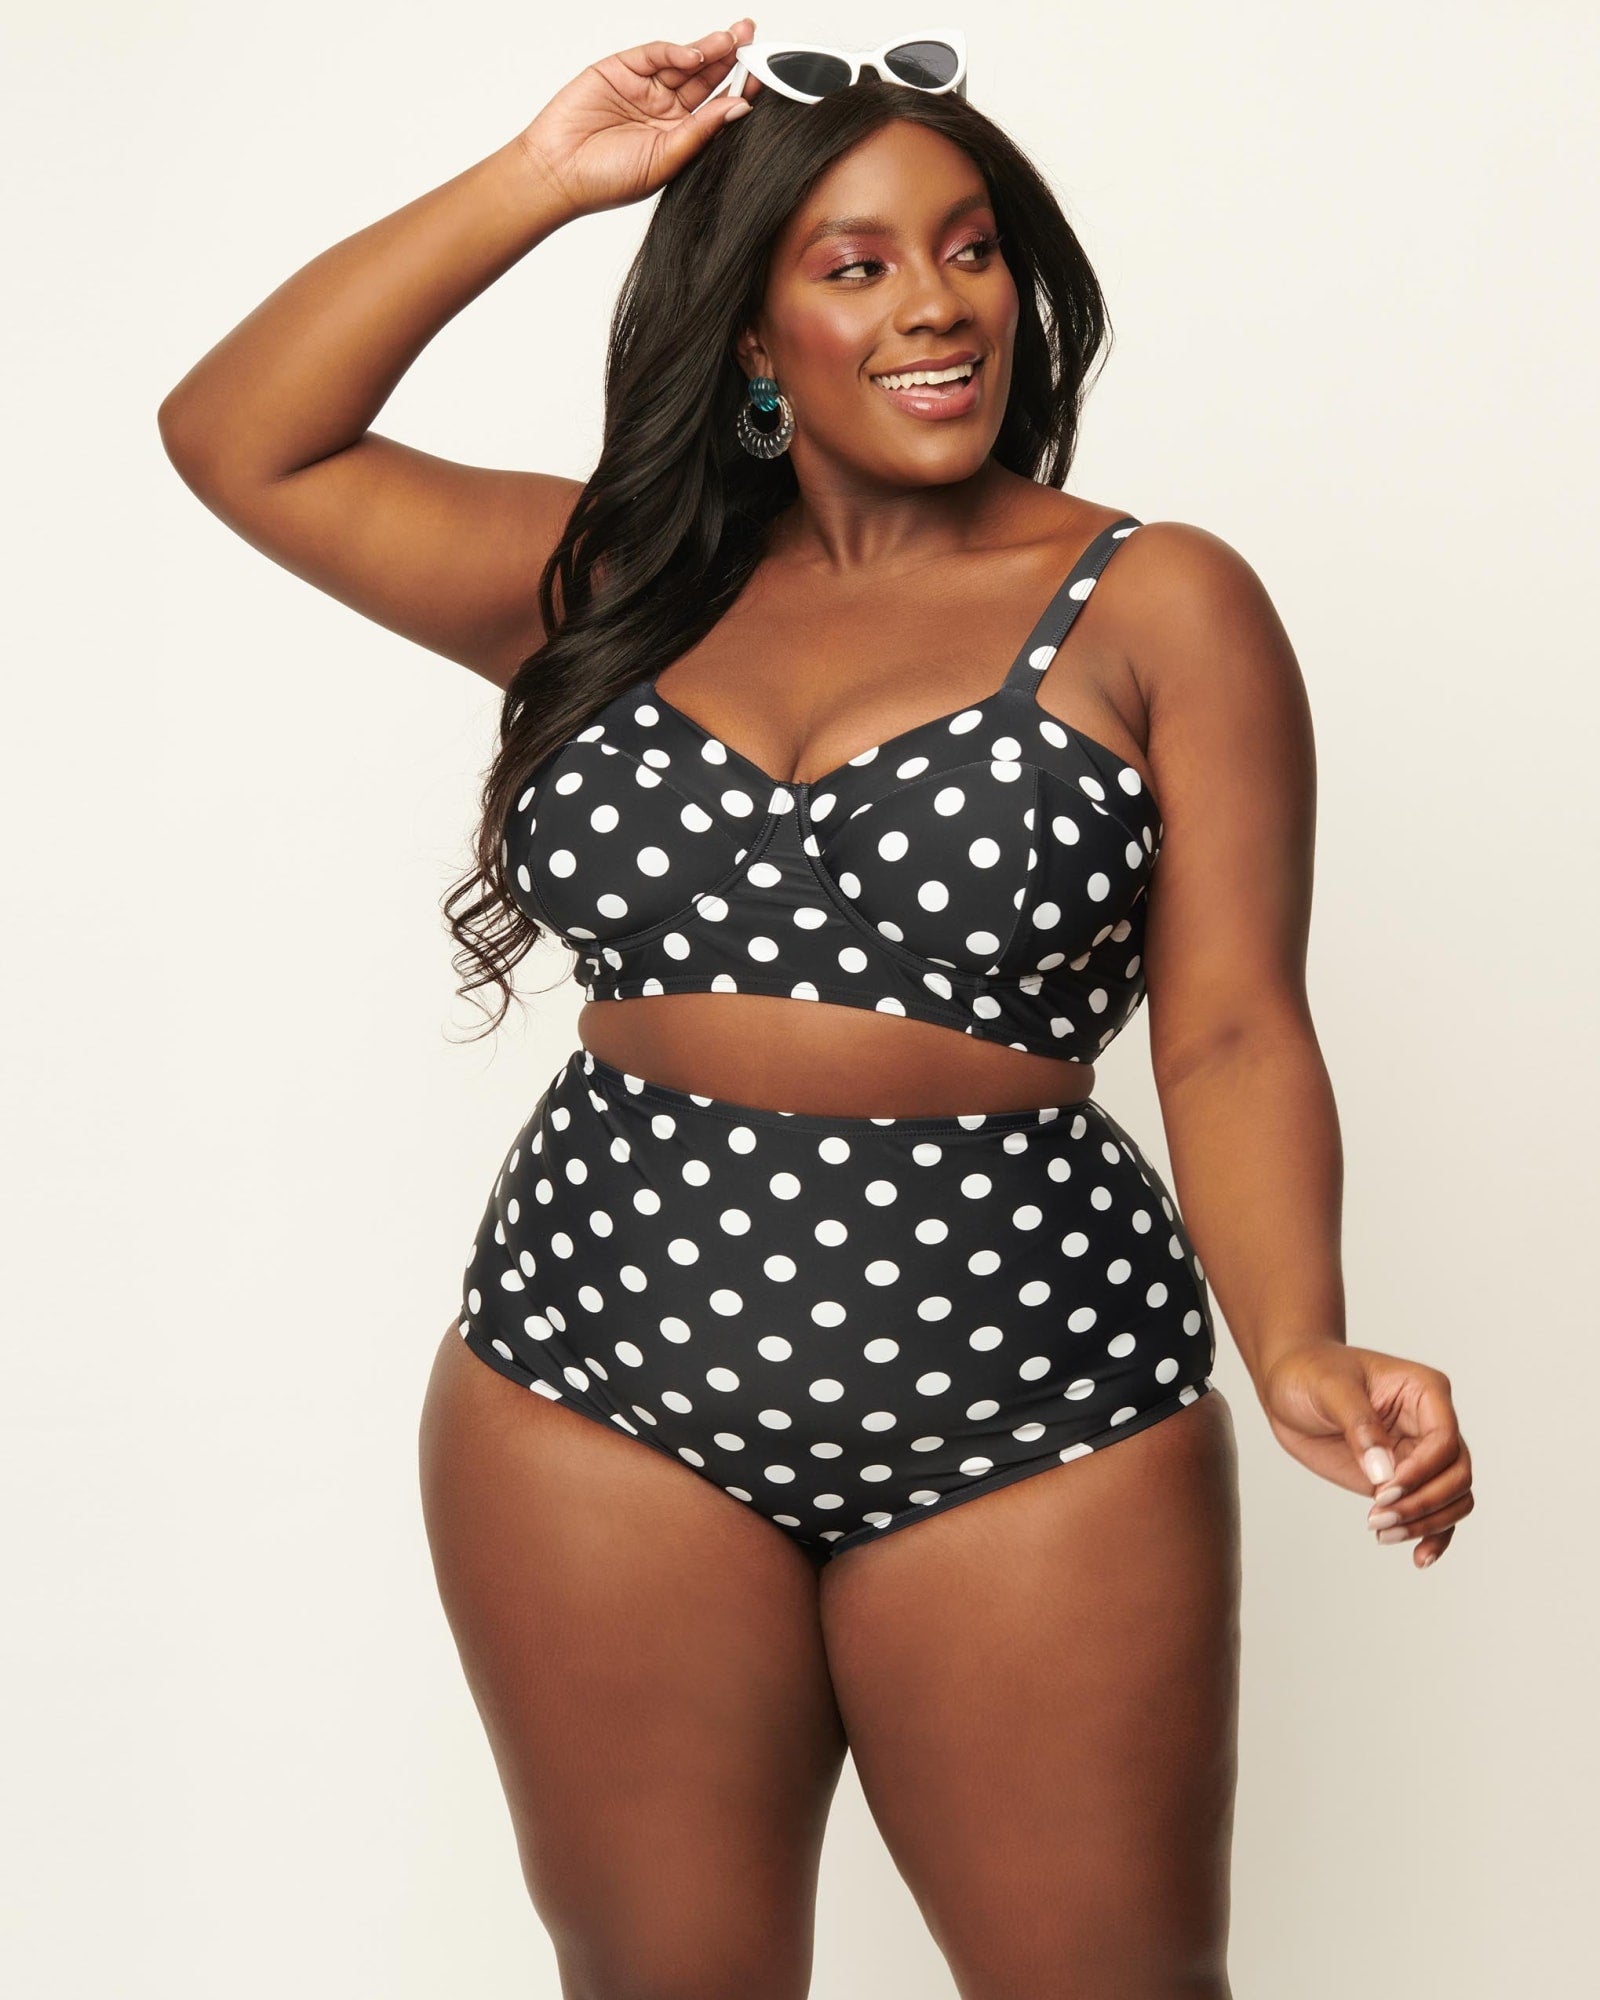 03 white with black polka dots long sleeve bathing suit with strappy sides  - Styleoholic